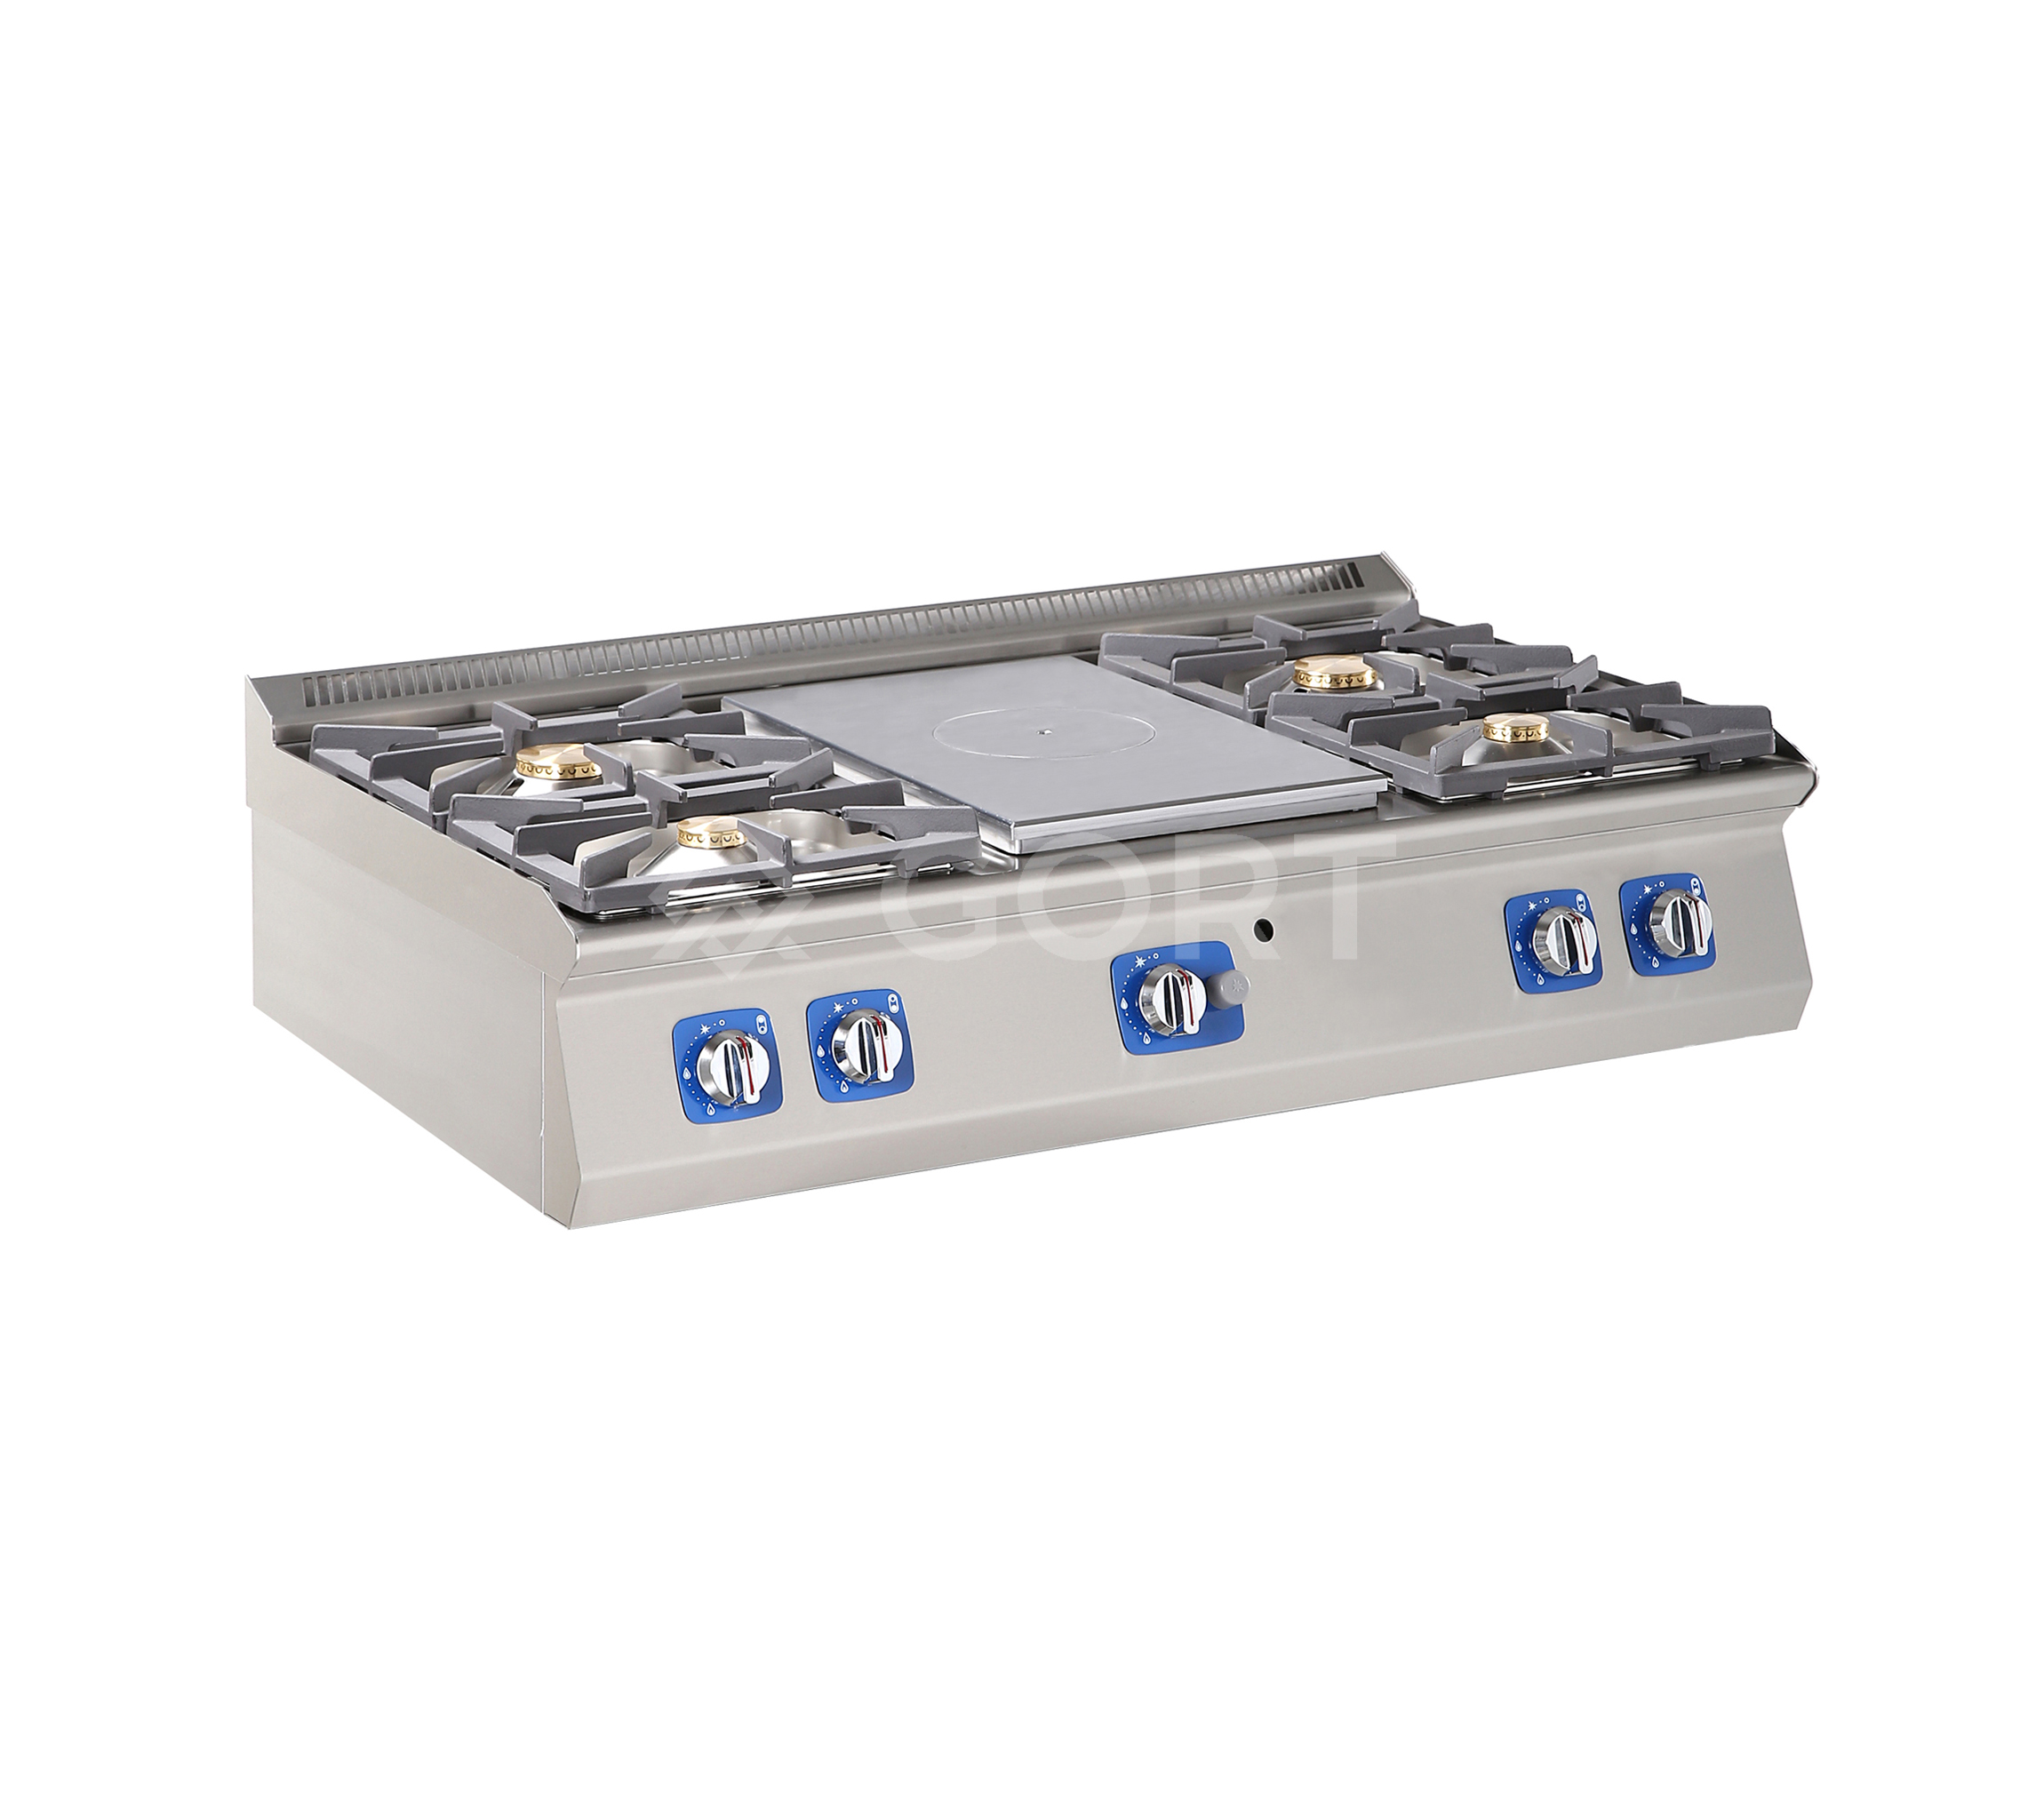 Gas solid top with 4 burner gas cooking top